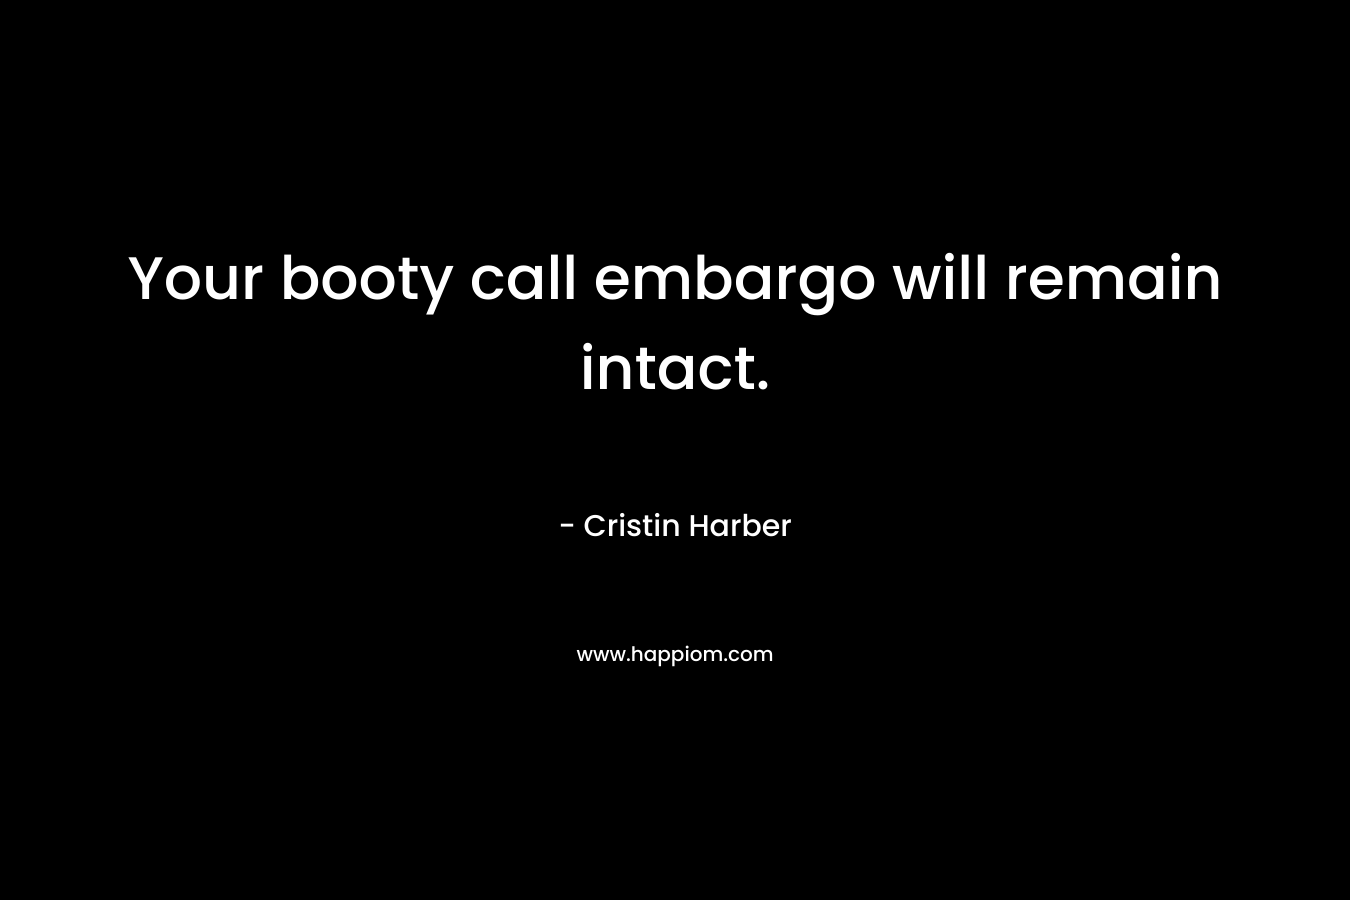 Your booty call embargo will remain intact.